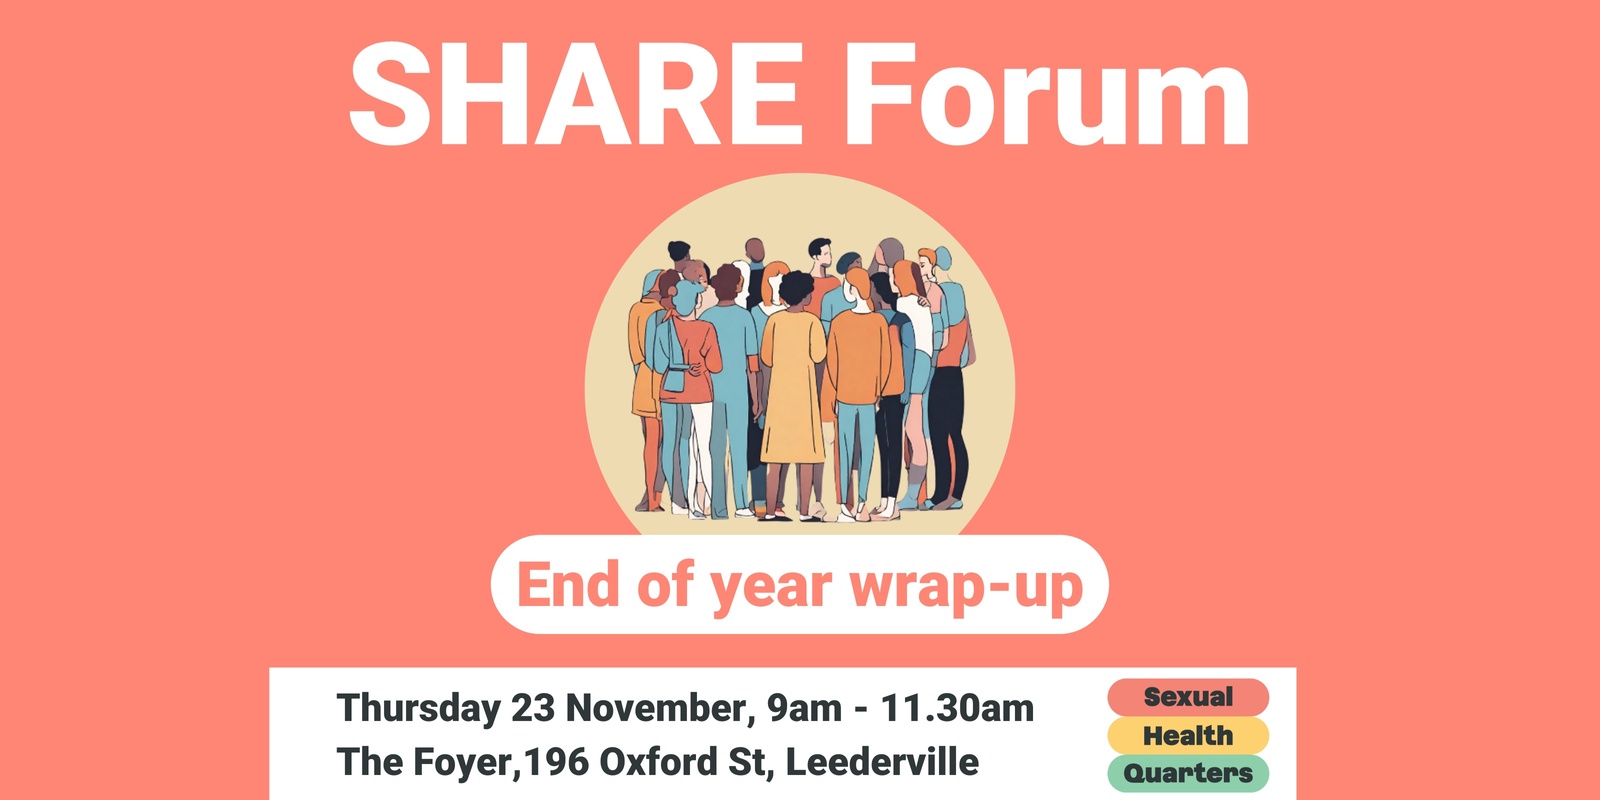 Banner image for SHARE Forum: You, Your Organisation and Celebrating the Year